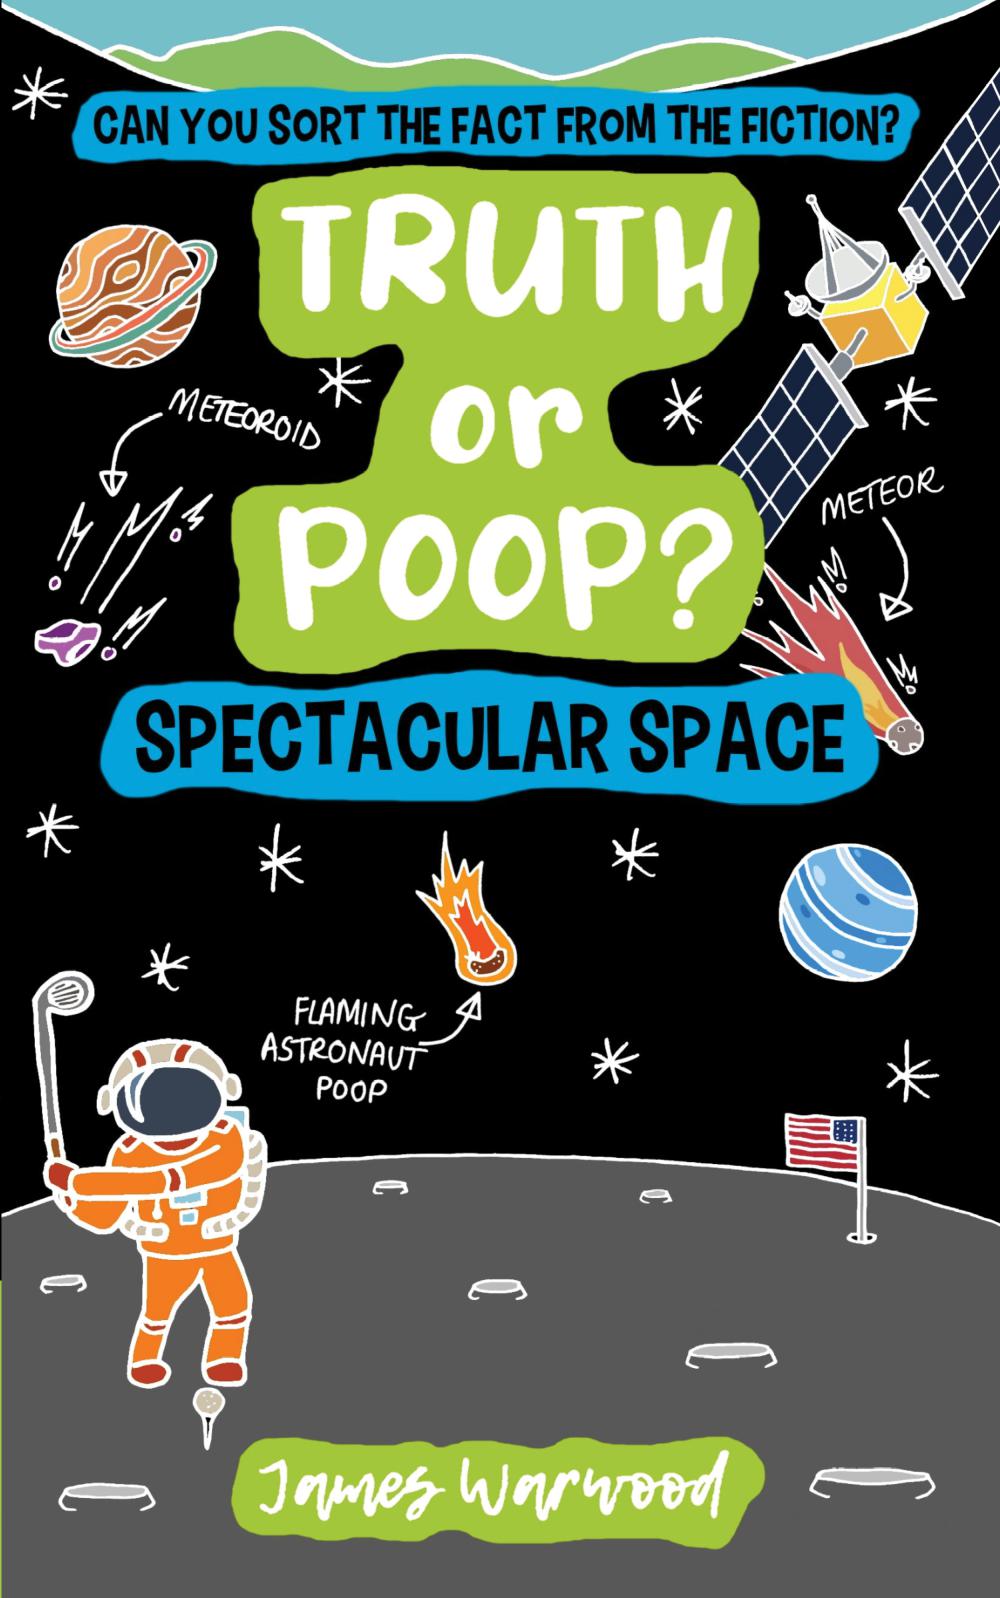 Poop?　Books　(eBook)　Space　Spectacular　–　Truth　Warwood　or　James